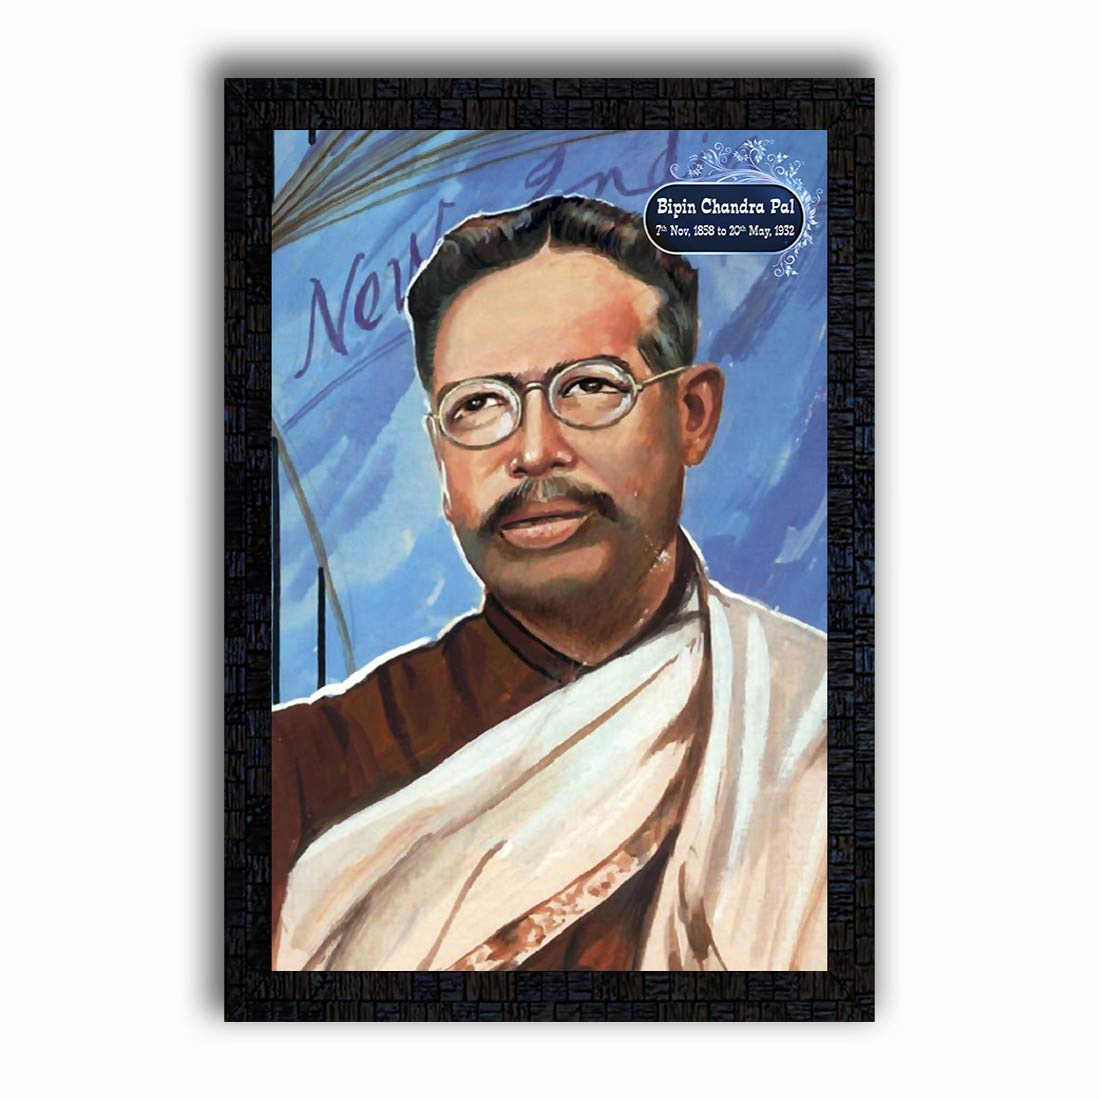 PNF Bipin Chandra Pal with Wooden Synthetic Frame Painting(13.5x19 inch, Multicolour, Synthetic), Amazon.in: Home & Kitchen